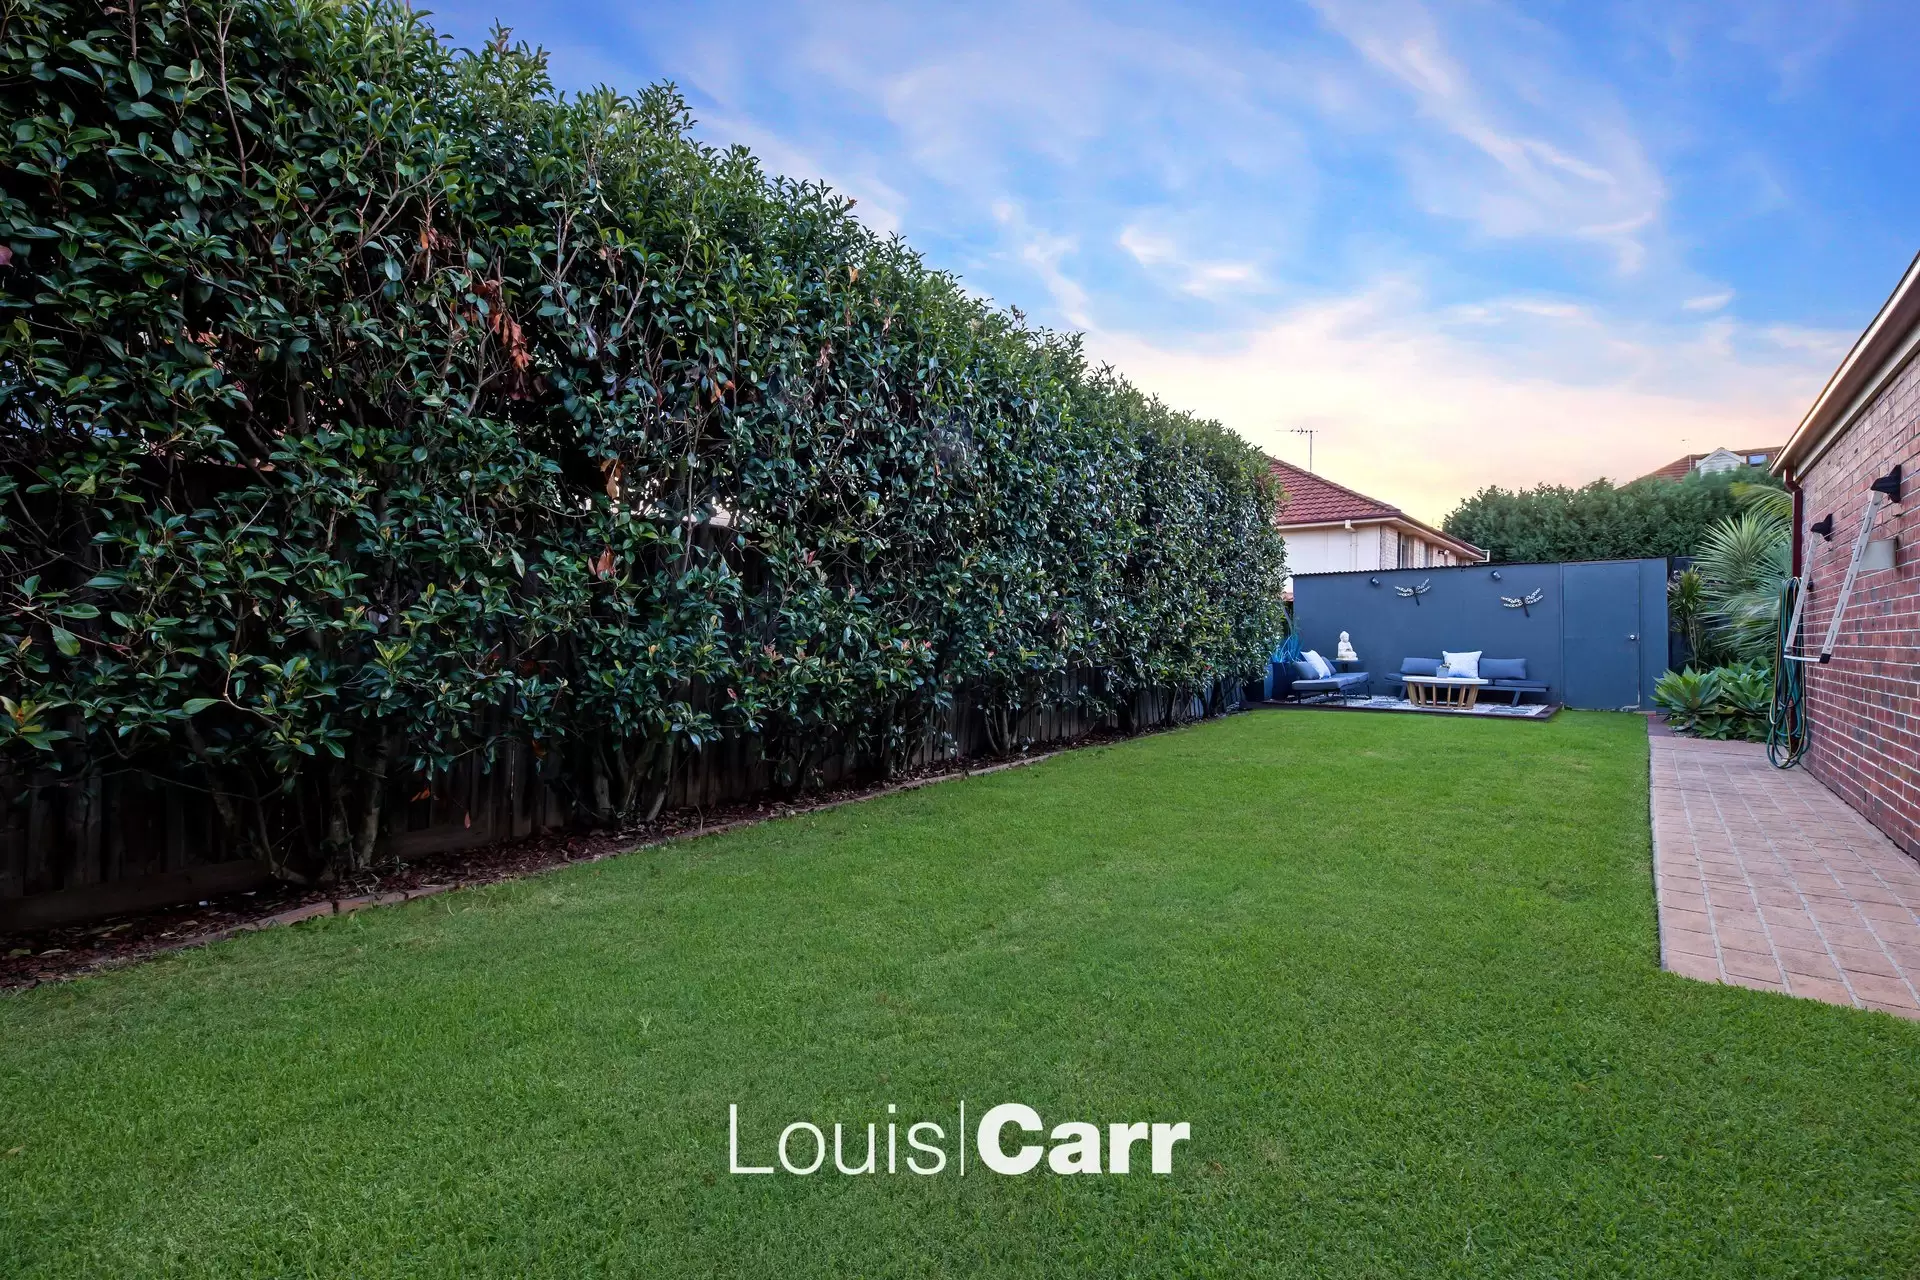 Photo #17: 4 Rooke Court, Kellyville - Sold by Louis Carr Real Estate